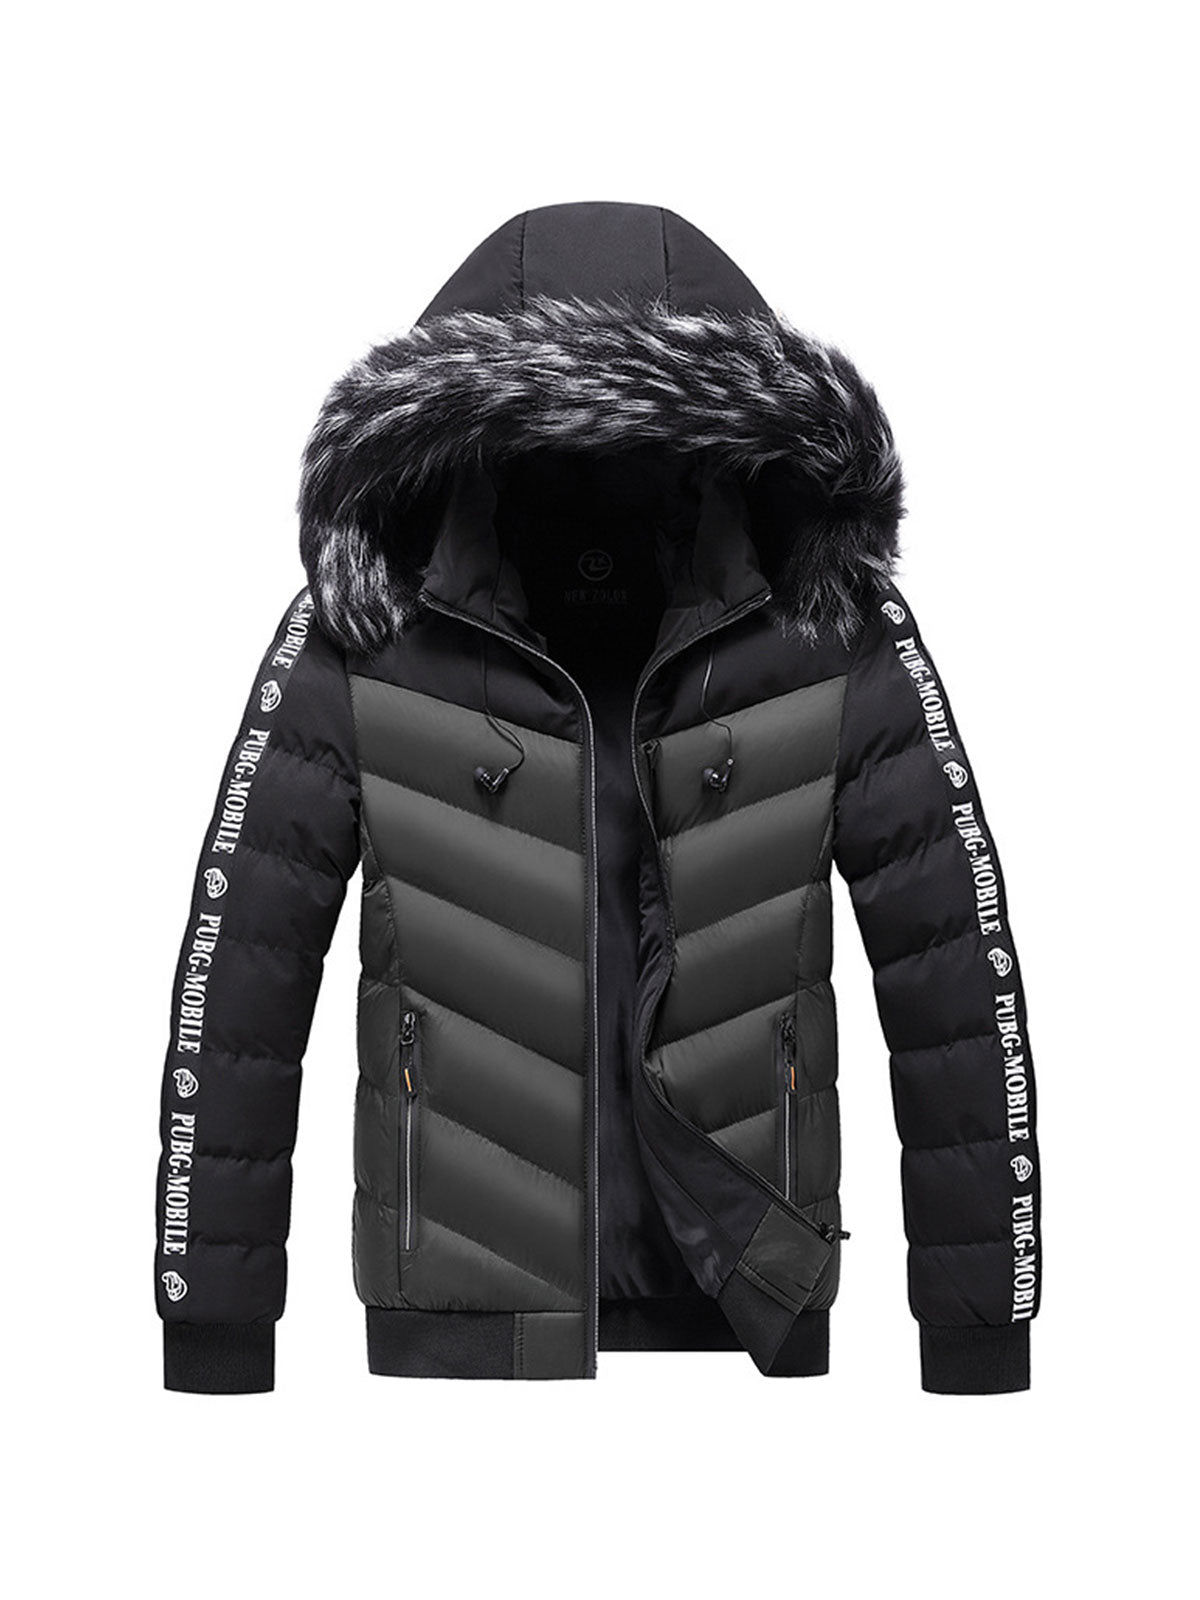 Hooded Coats Parkas with Thick Fur Collar Windproof